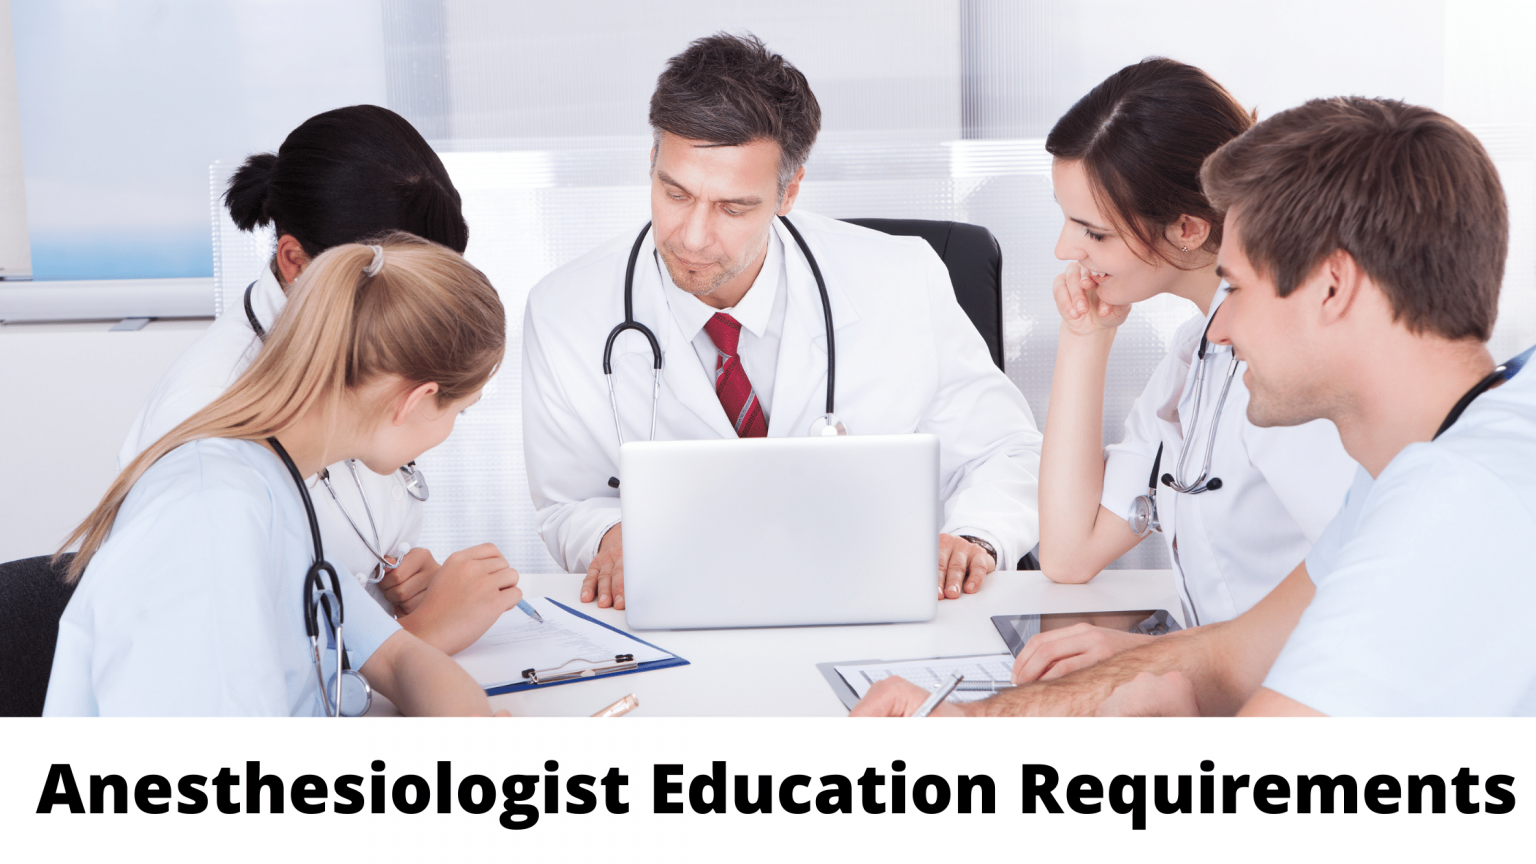 Anesthesiologist: Education Requirements and Beyond